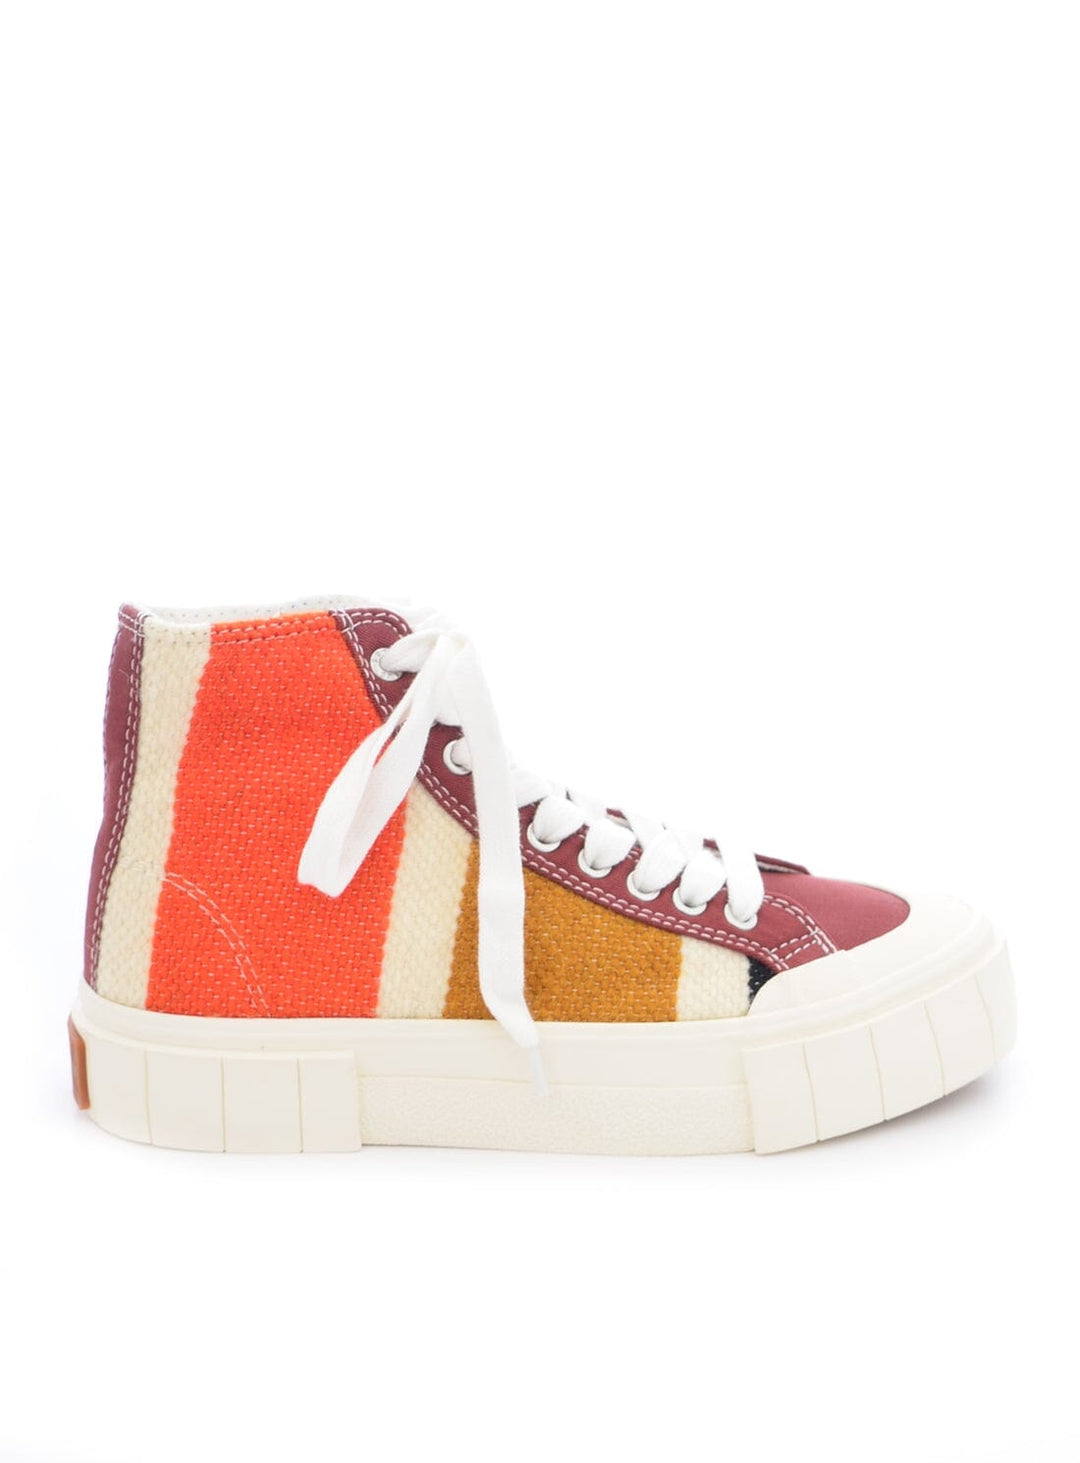 Palm Moroccan Trainers Shoes YBDFinds 